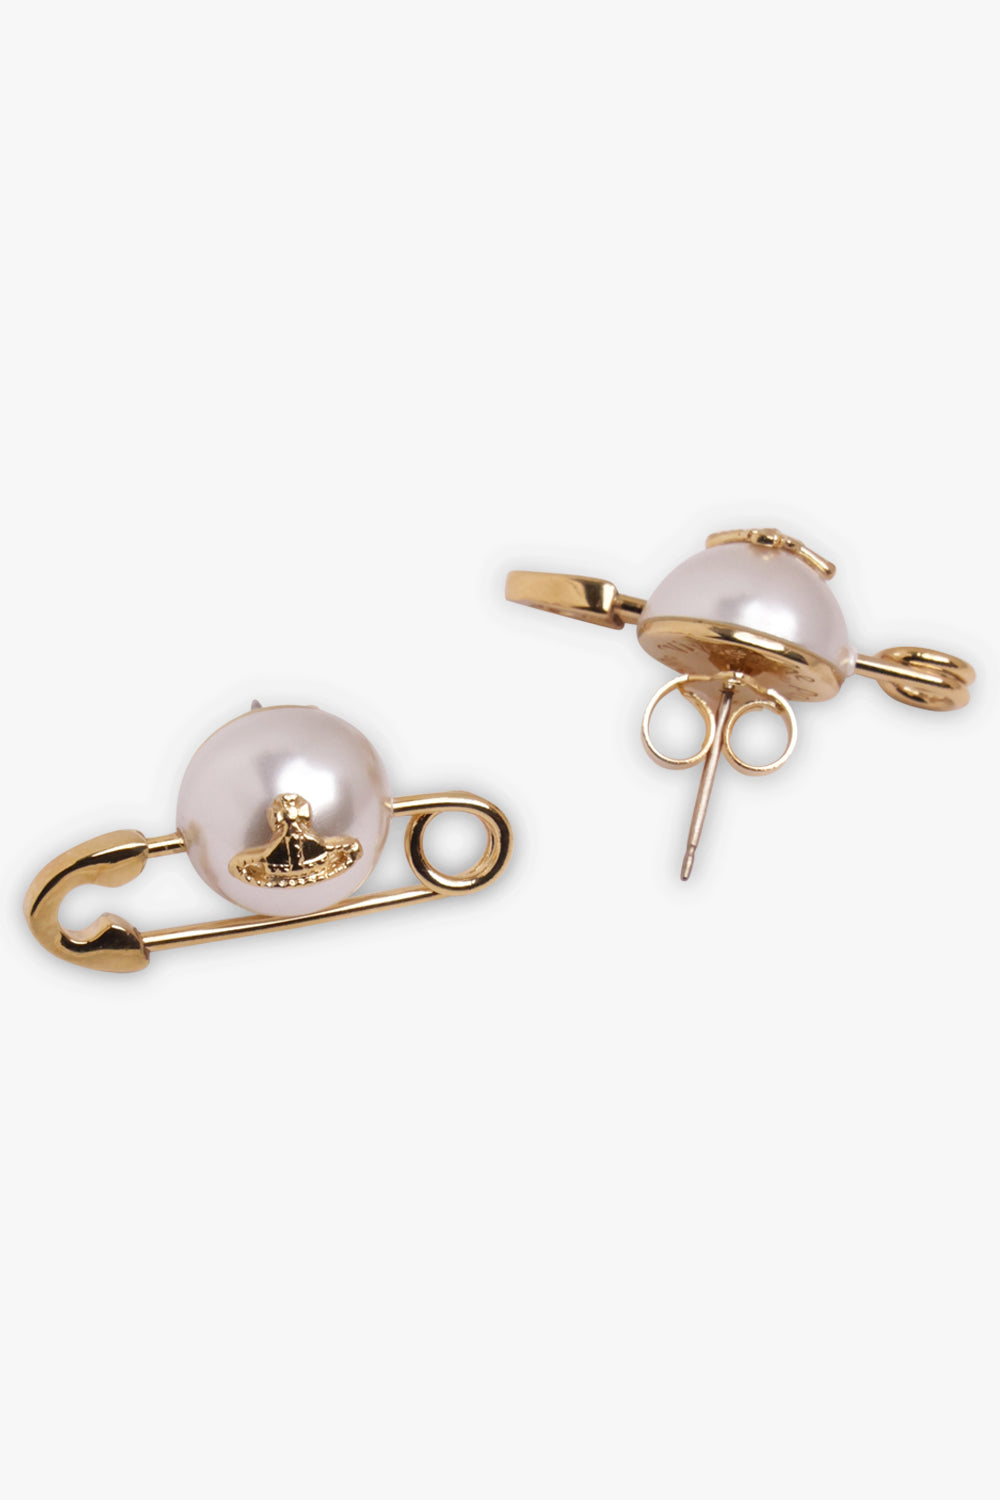 VIVIENNE WESTWOOD JEWELLRY GOLD / GOLD JORDAN SAFETY PIN PEARL EARRINGS | GOLD